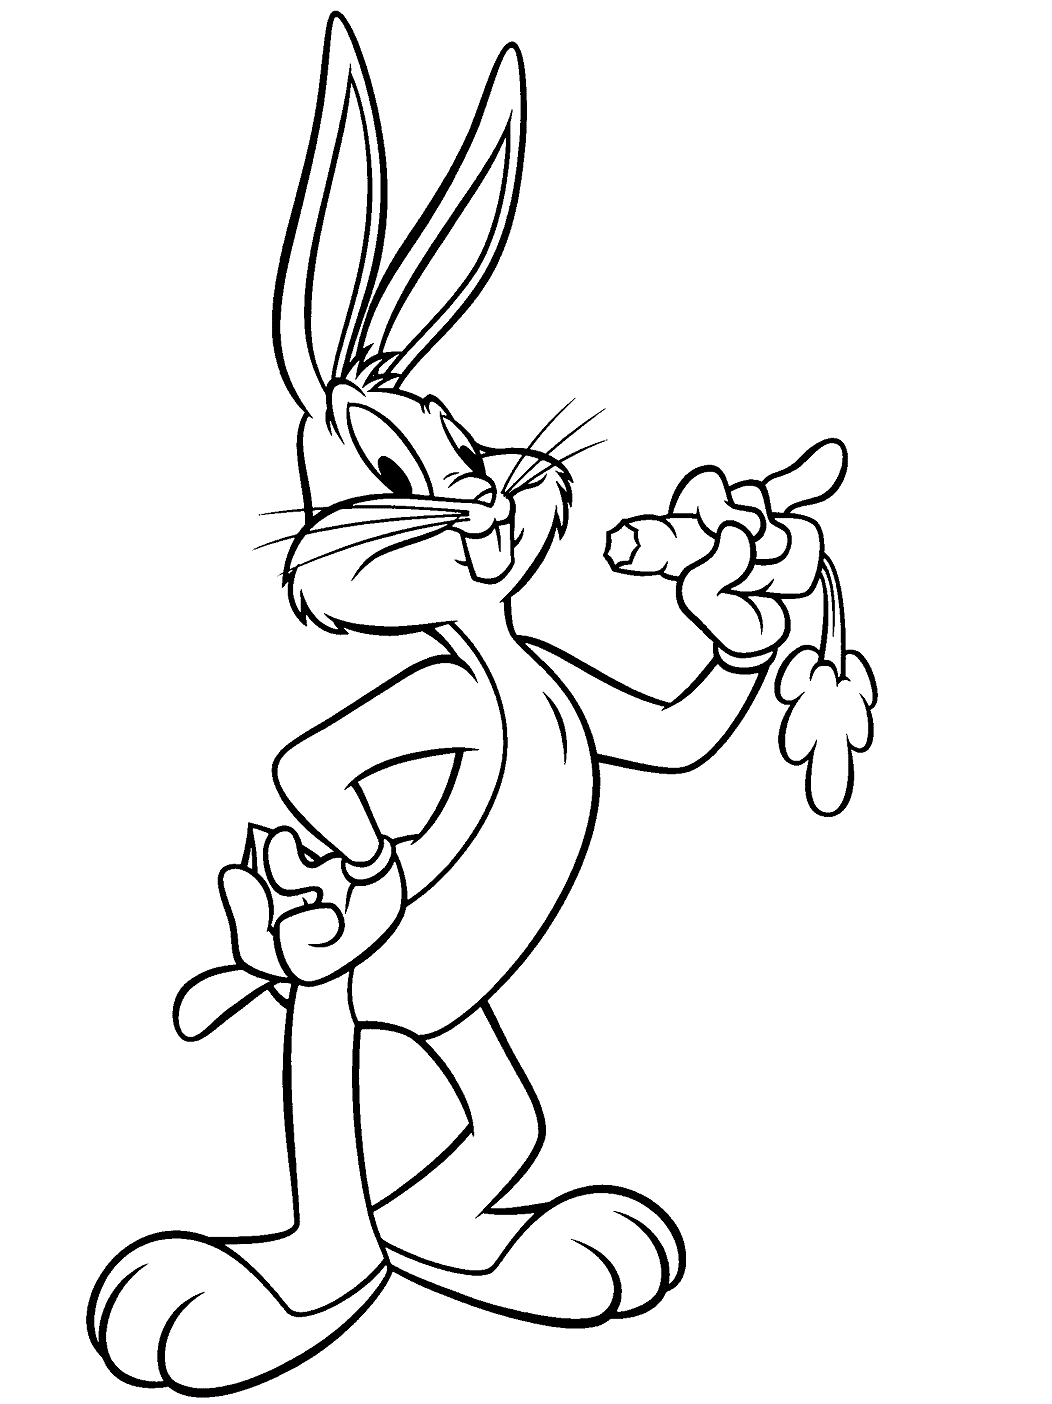 Looney tunes characters coloring pages printable for free download